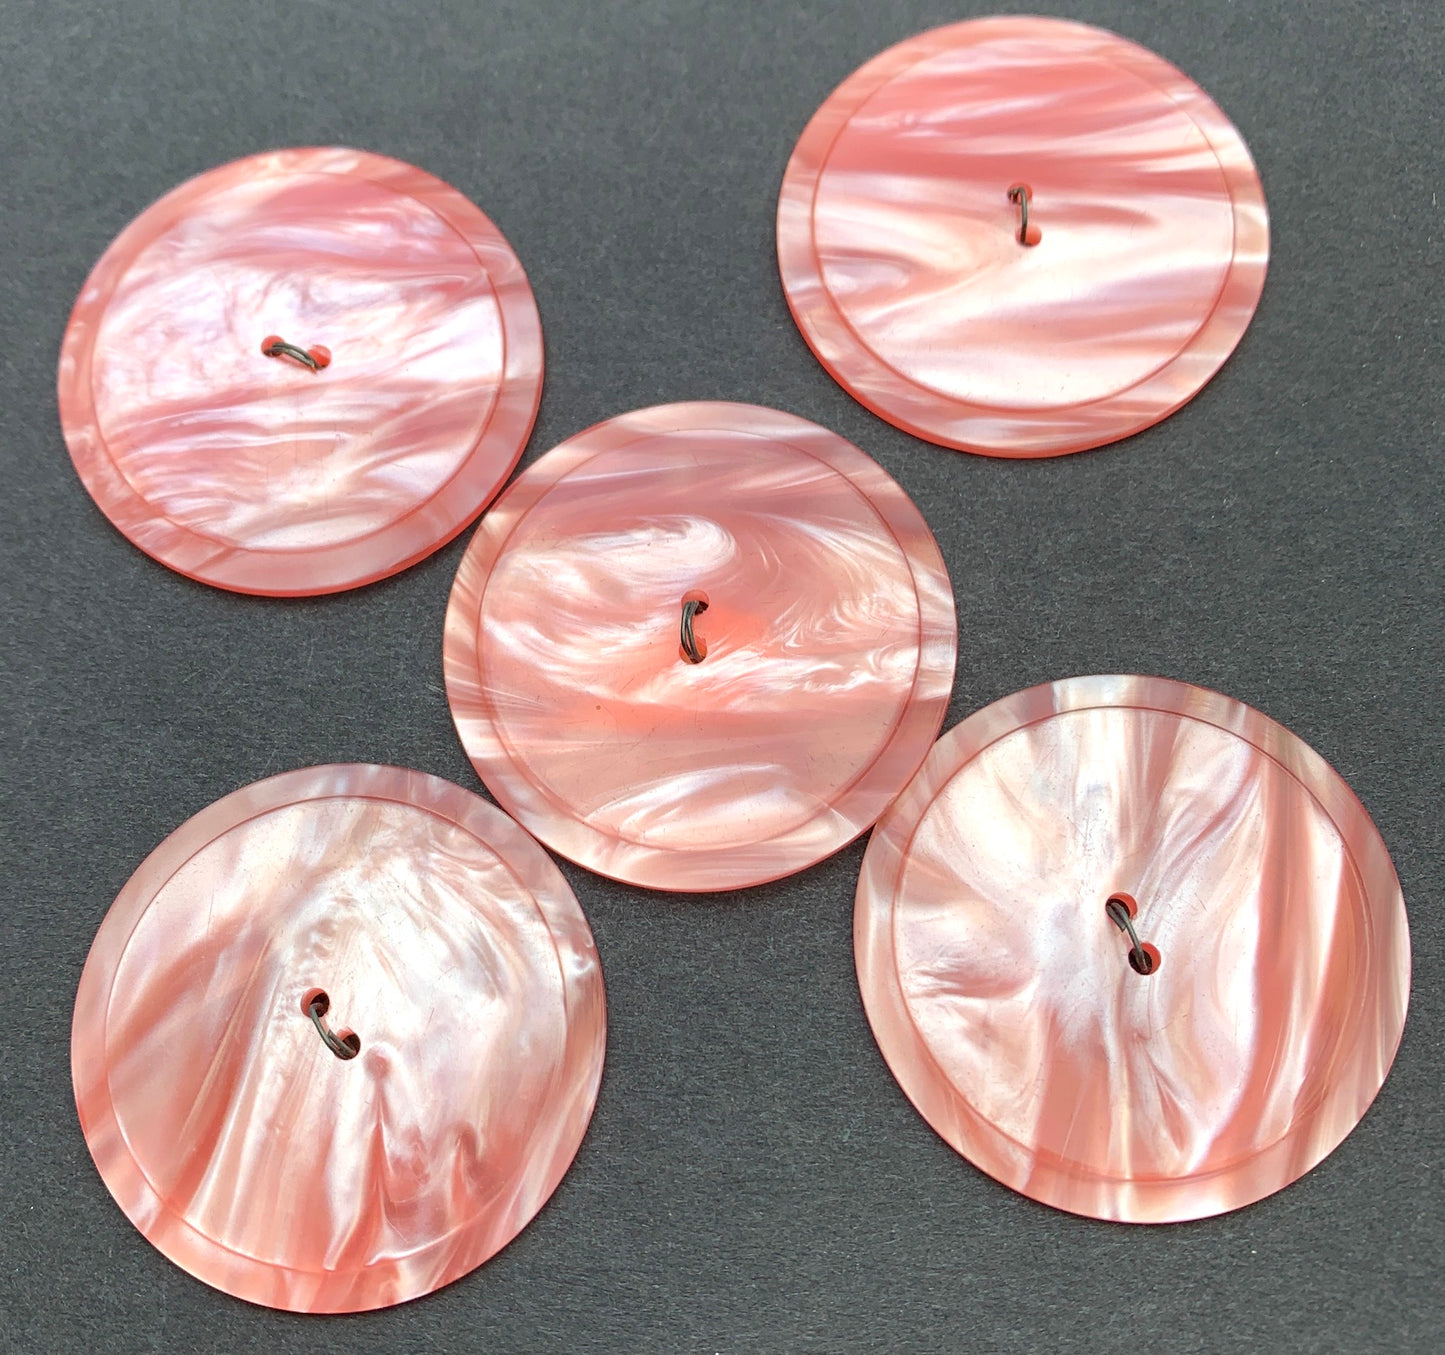 1 Moonglow Lucite Pink 3.7cm Button